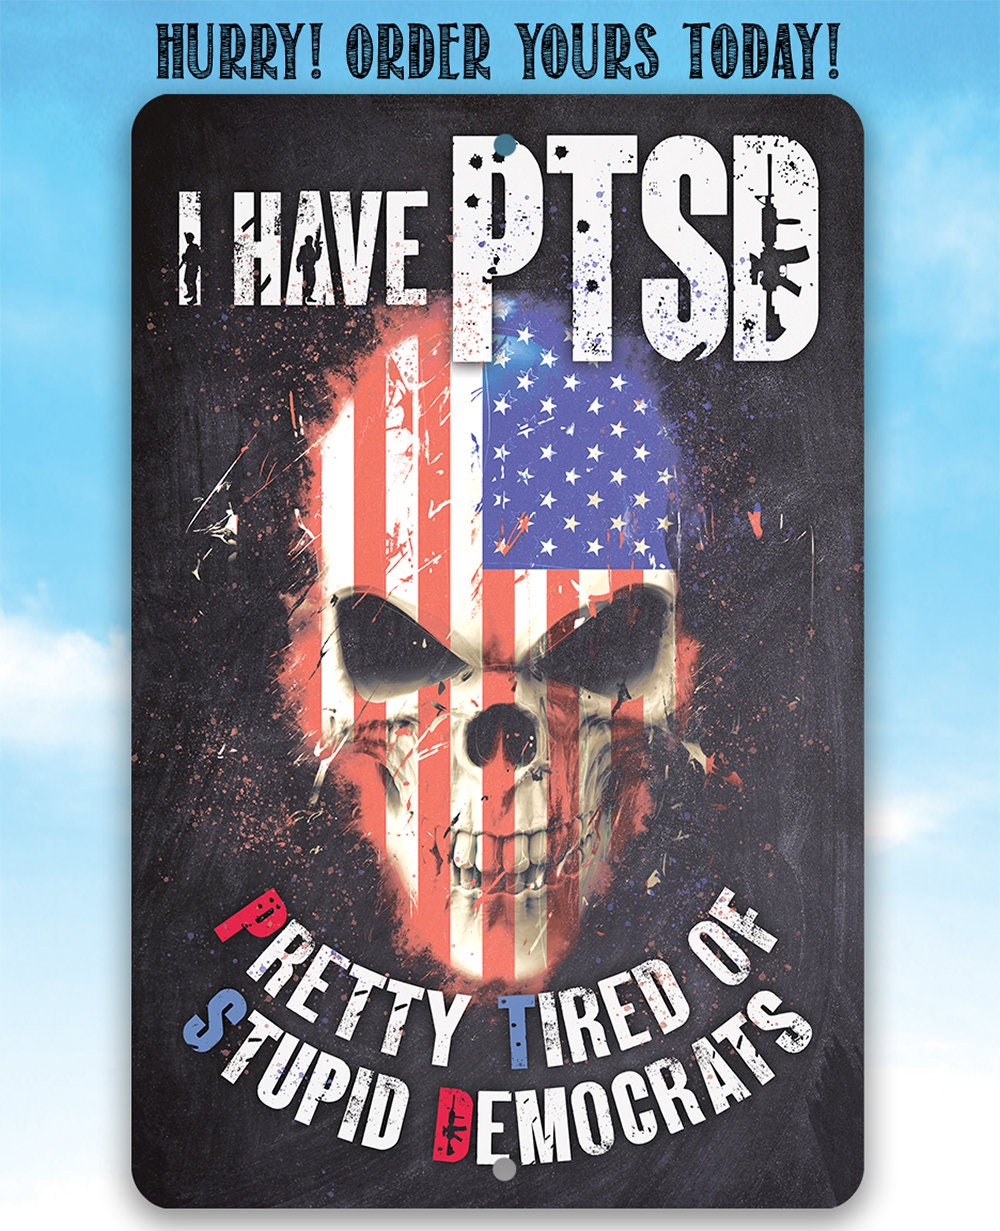 I Have PTSD (Pretty Tired of Stupid Democrats) - Metal Sign Metal Sign Lone Star Art 